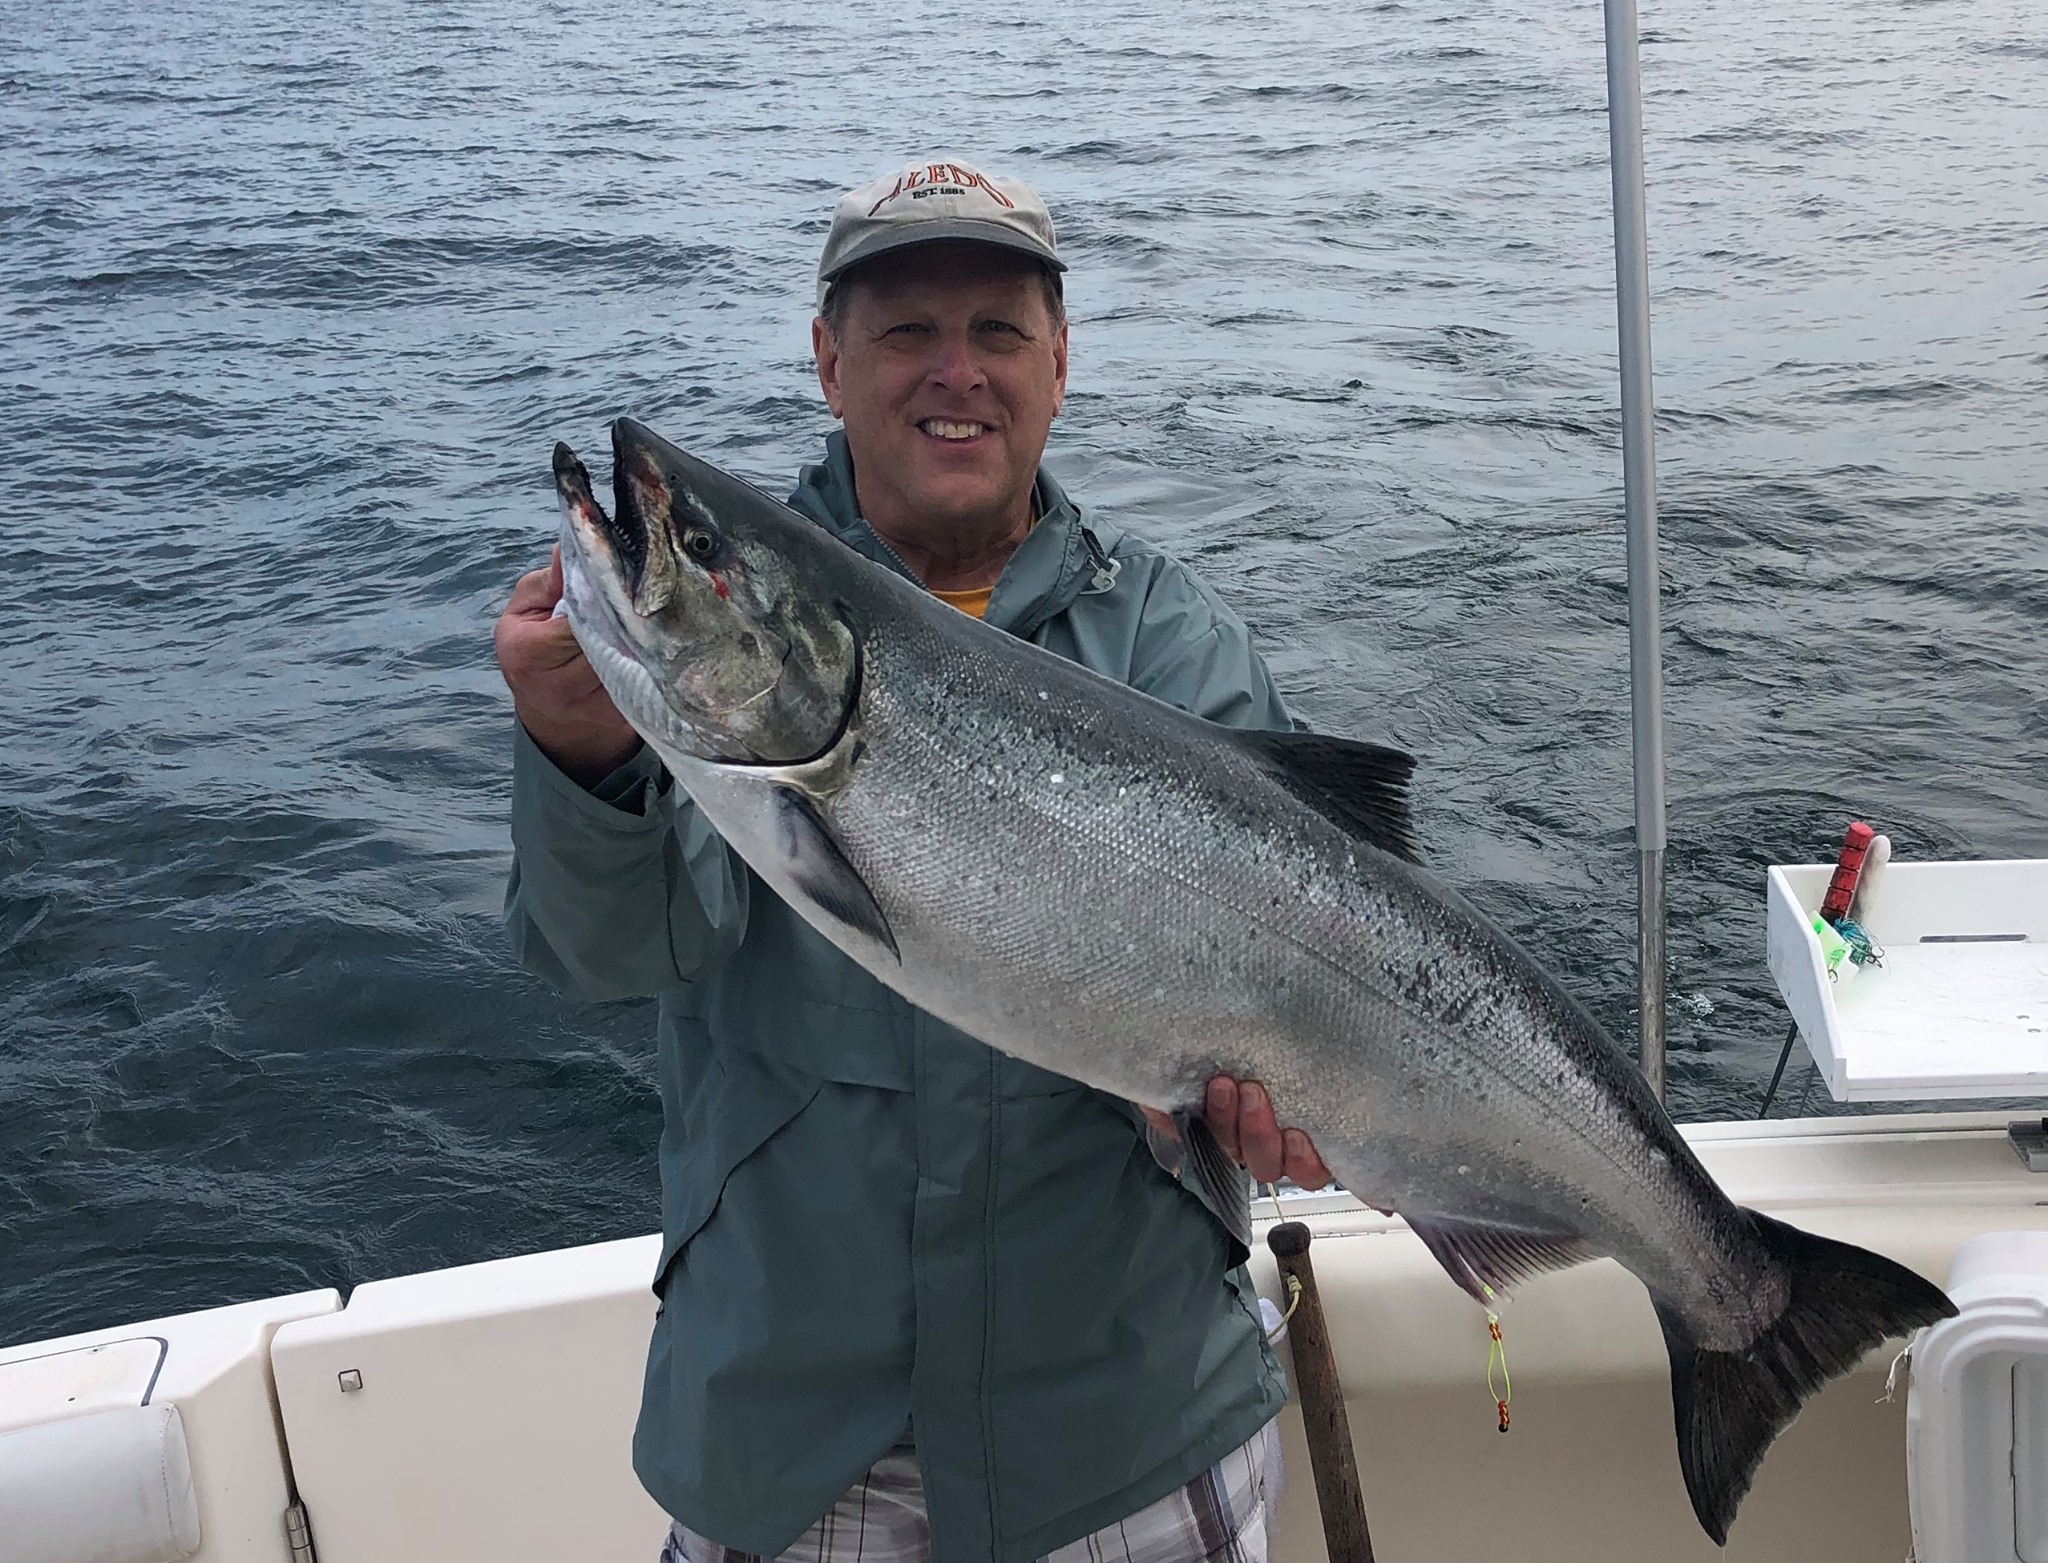 A nice king salmon caught on one of our Kewaunee Wisconsin fishing charters on Lake Michigan